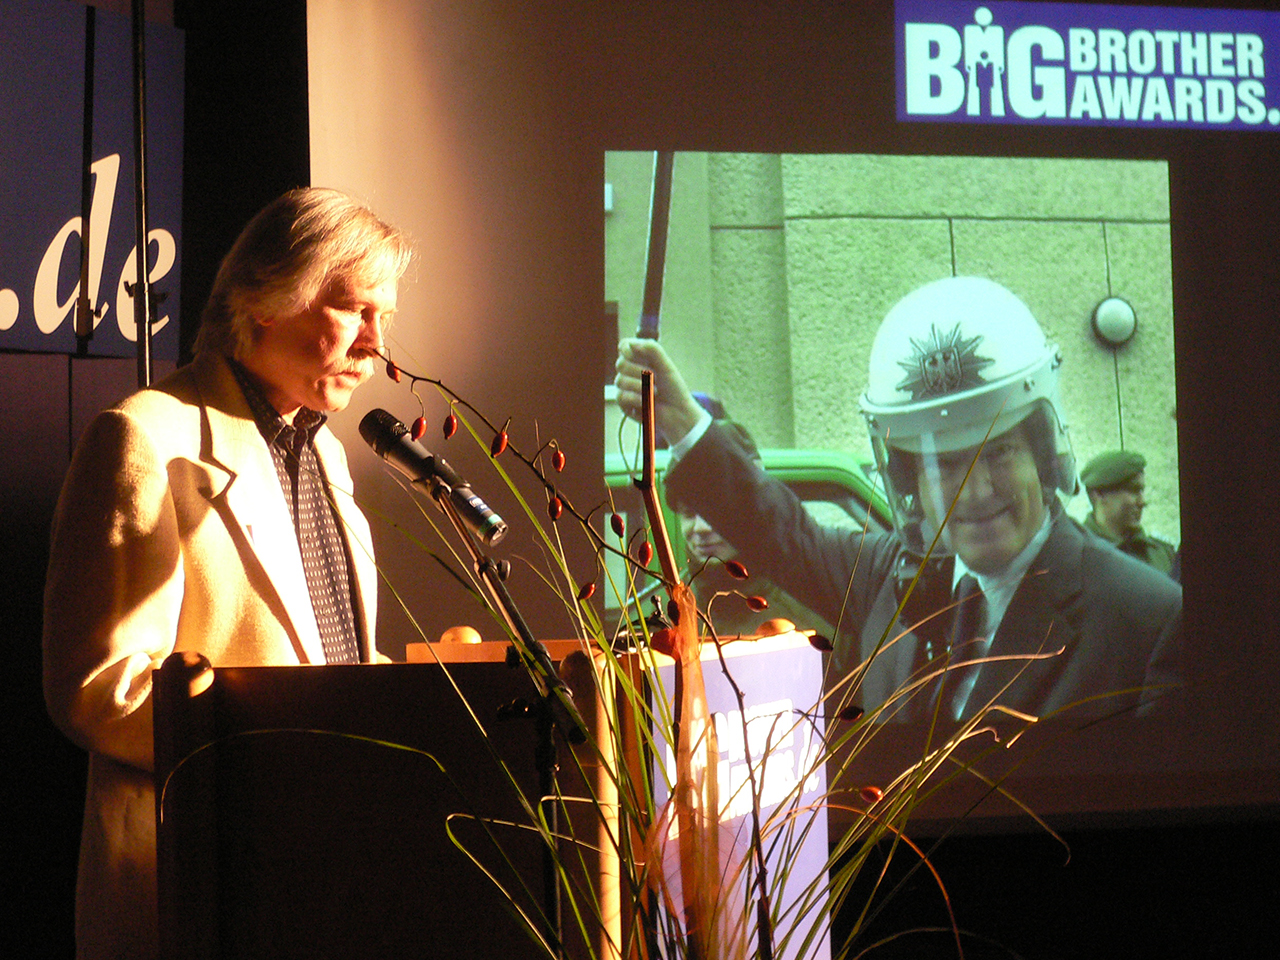 Rolf Gössner at the lectern at the BigBrotherAwards. On the canvas Otto Schily in police uniform